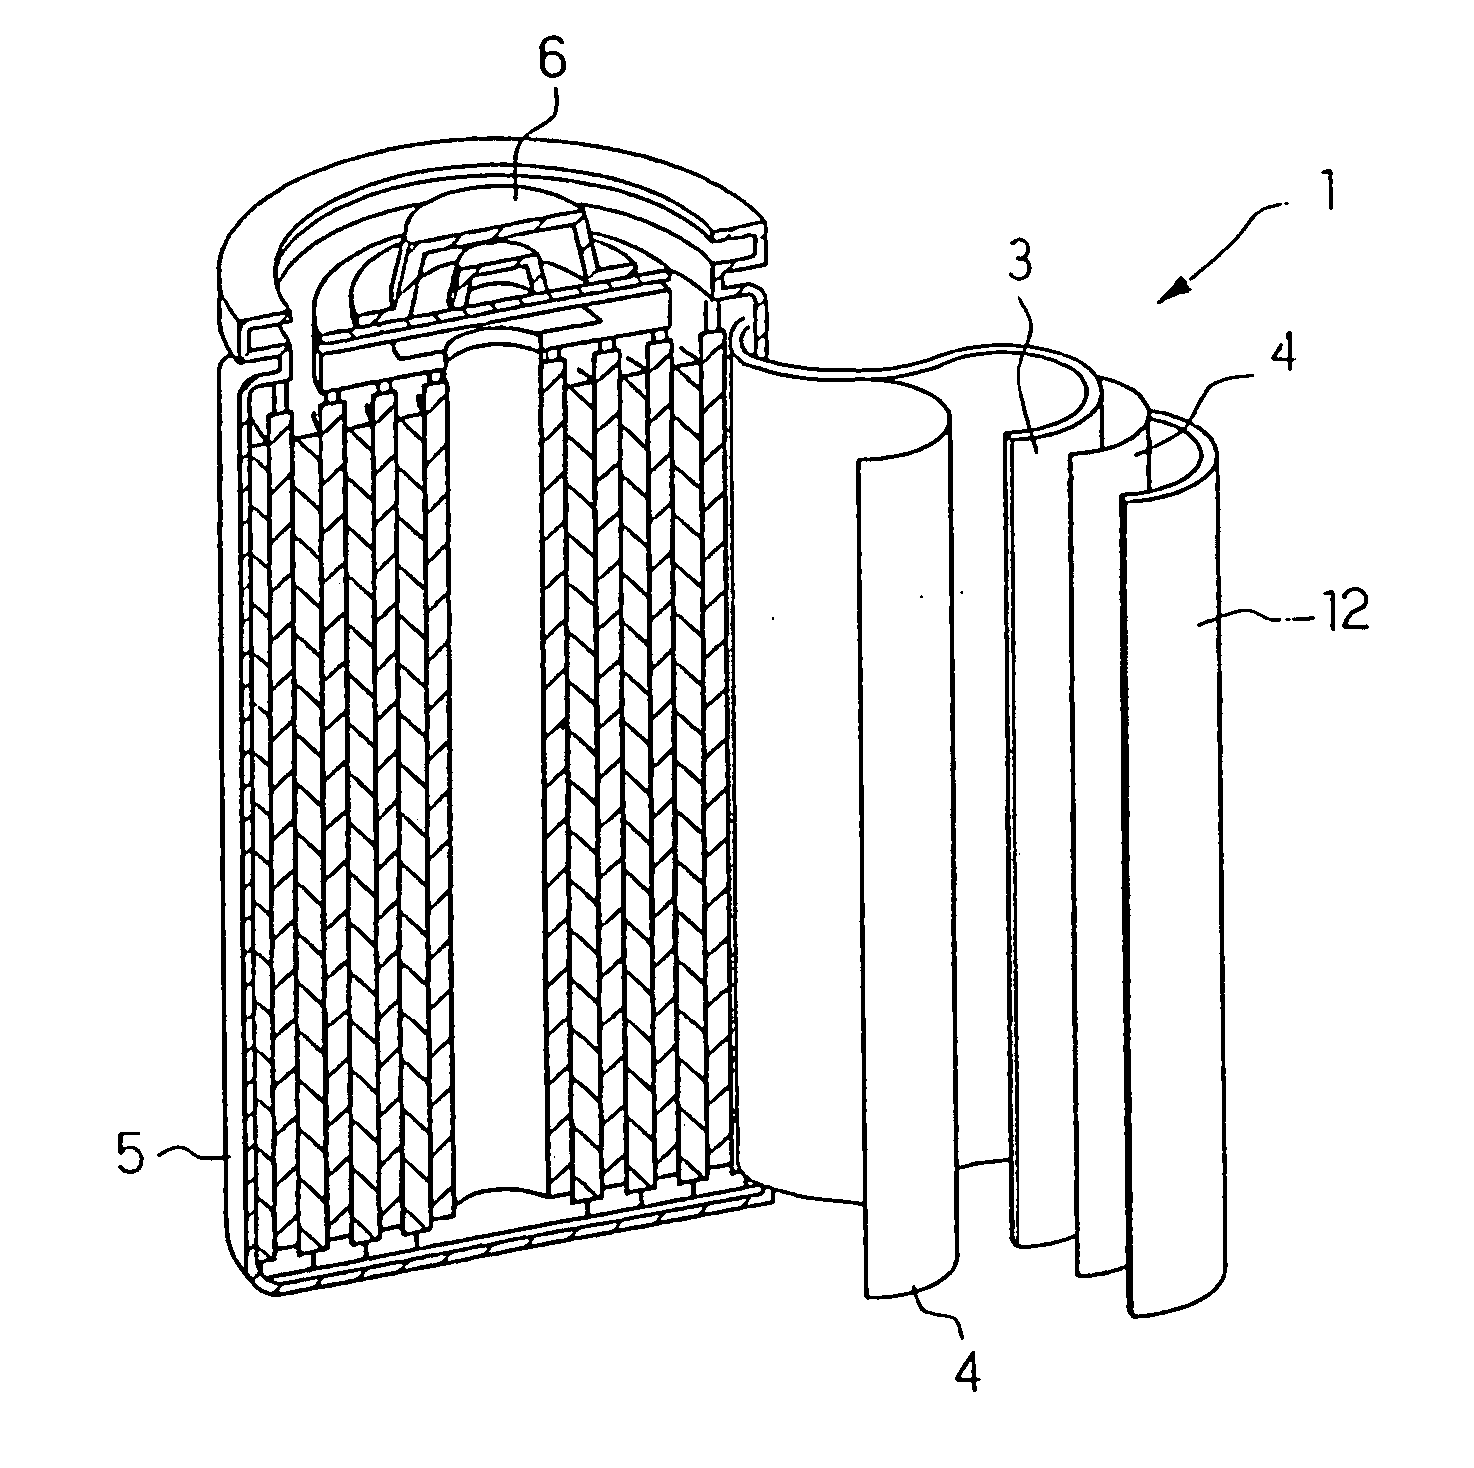 Composition for protecting negative electrode for lithium metal battery, and lithium metal battery fabricated using same